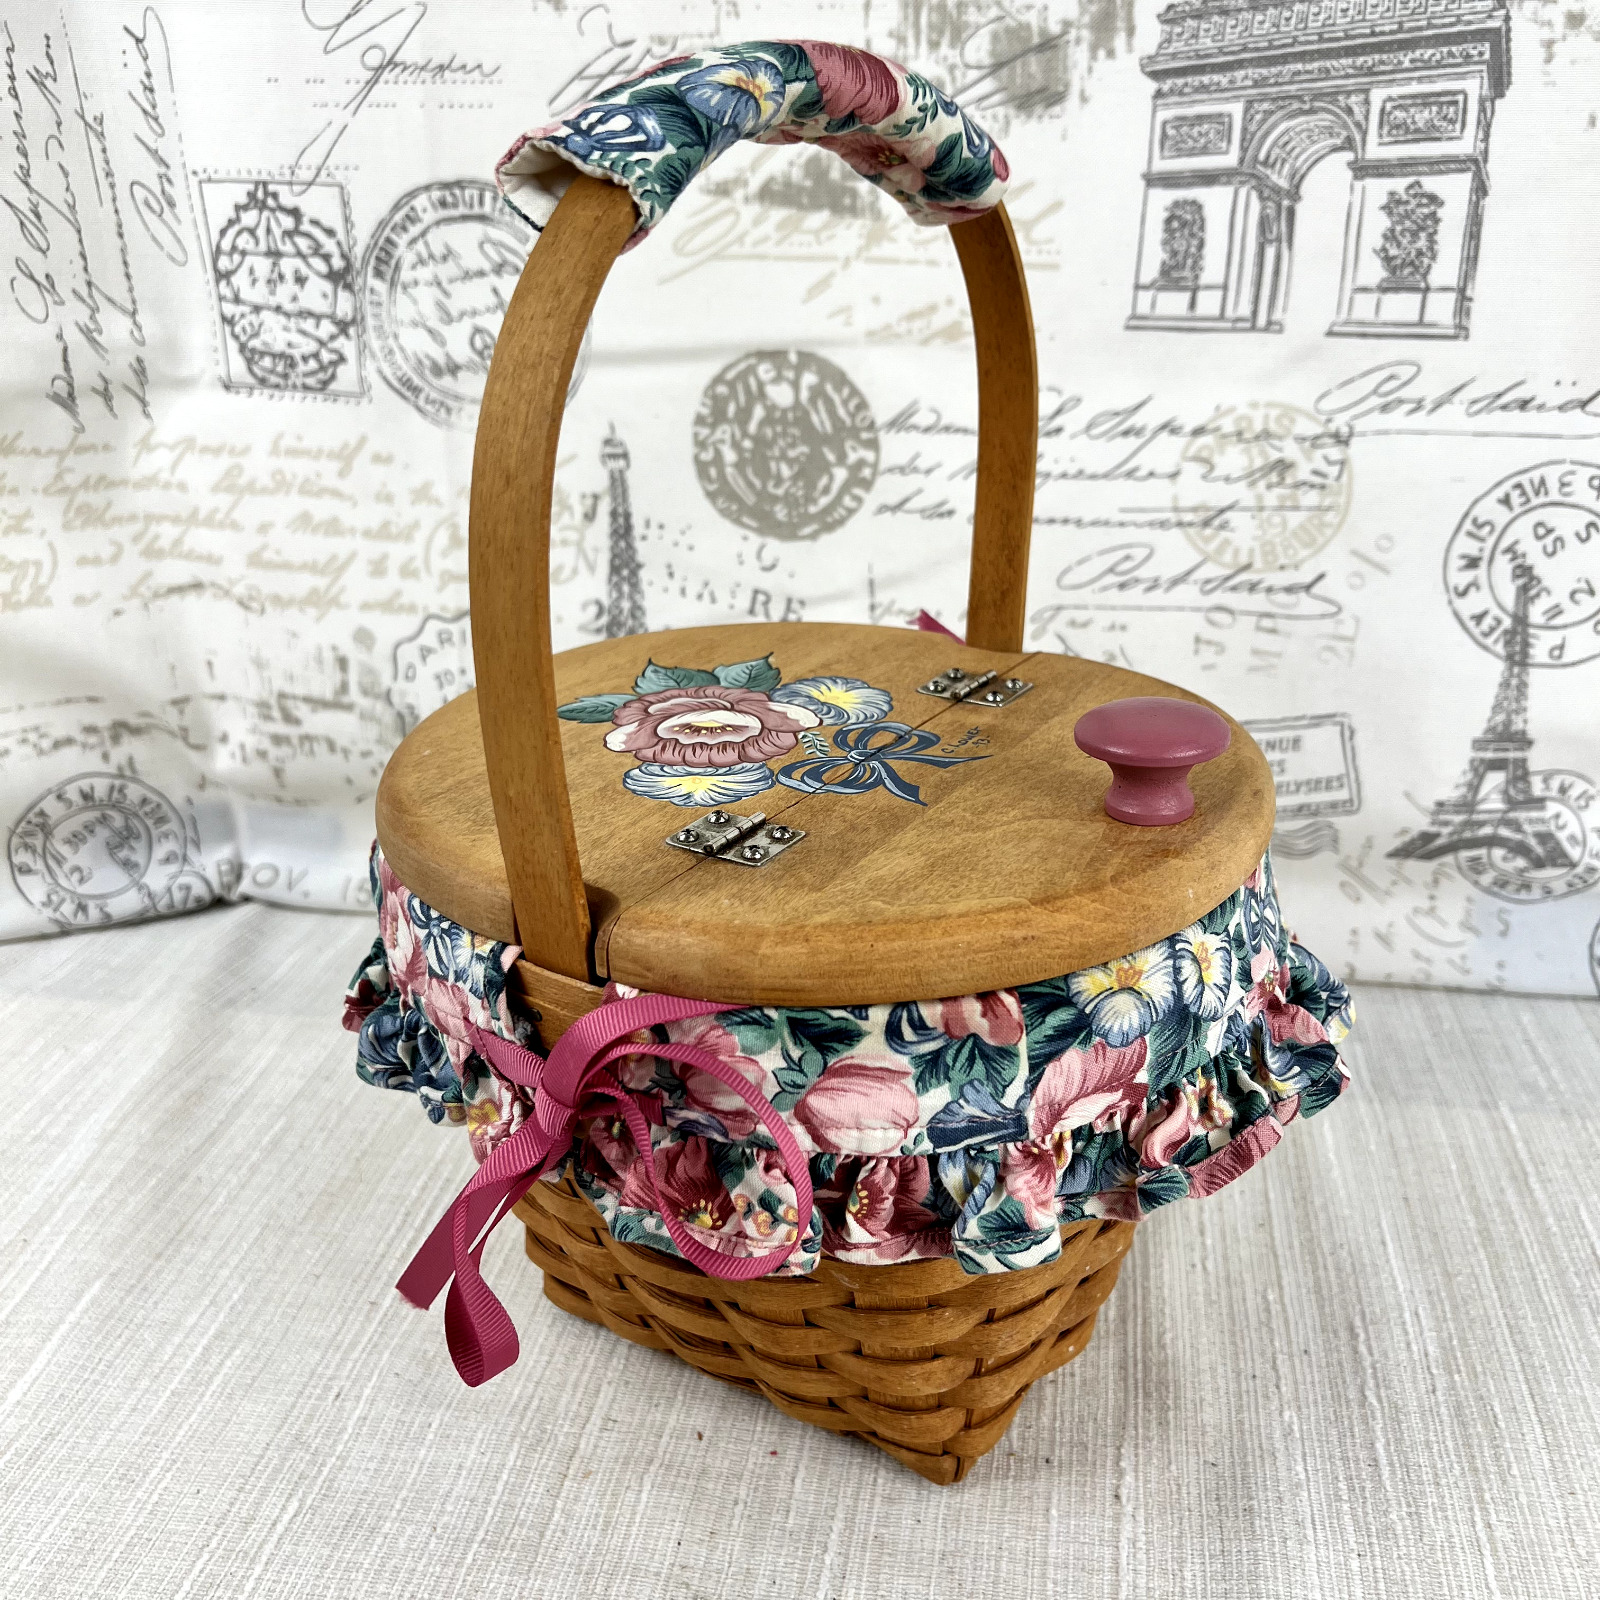 Longaberger 1993 Mothers Day Basket with Painted Lid, Liner + Protector 8.5x8x6